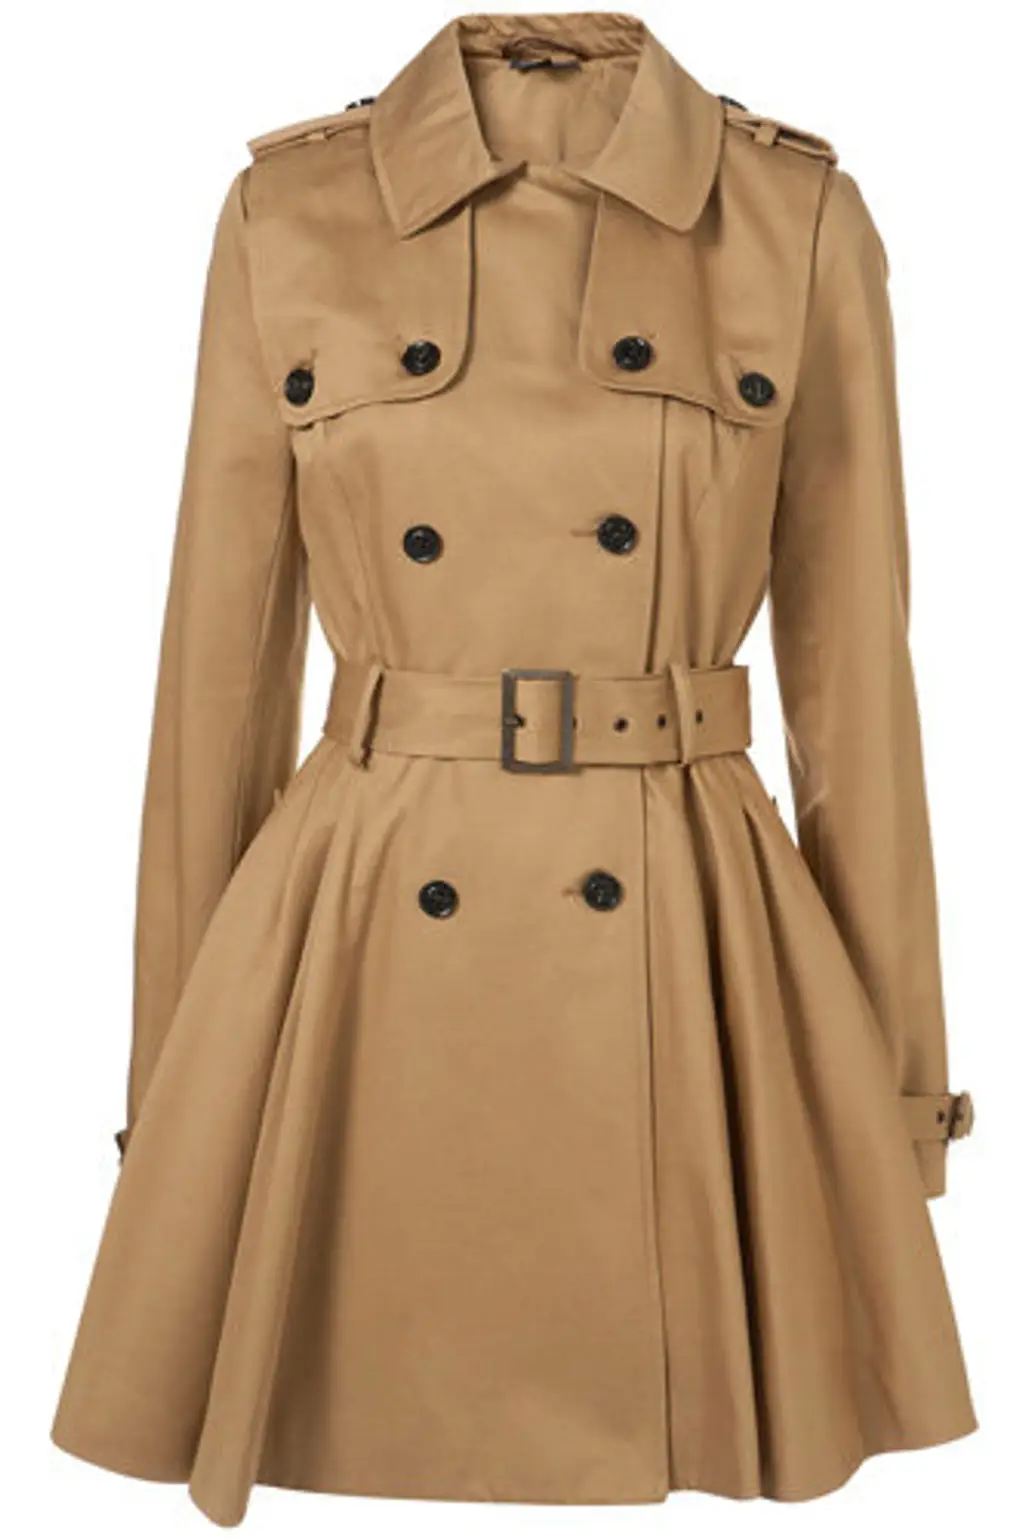 Topshop Light Stone Double Storm Flap Trench Coat